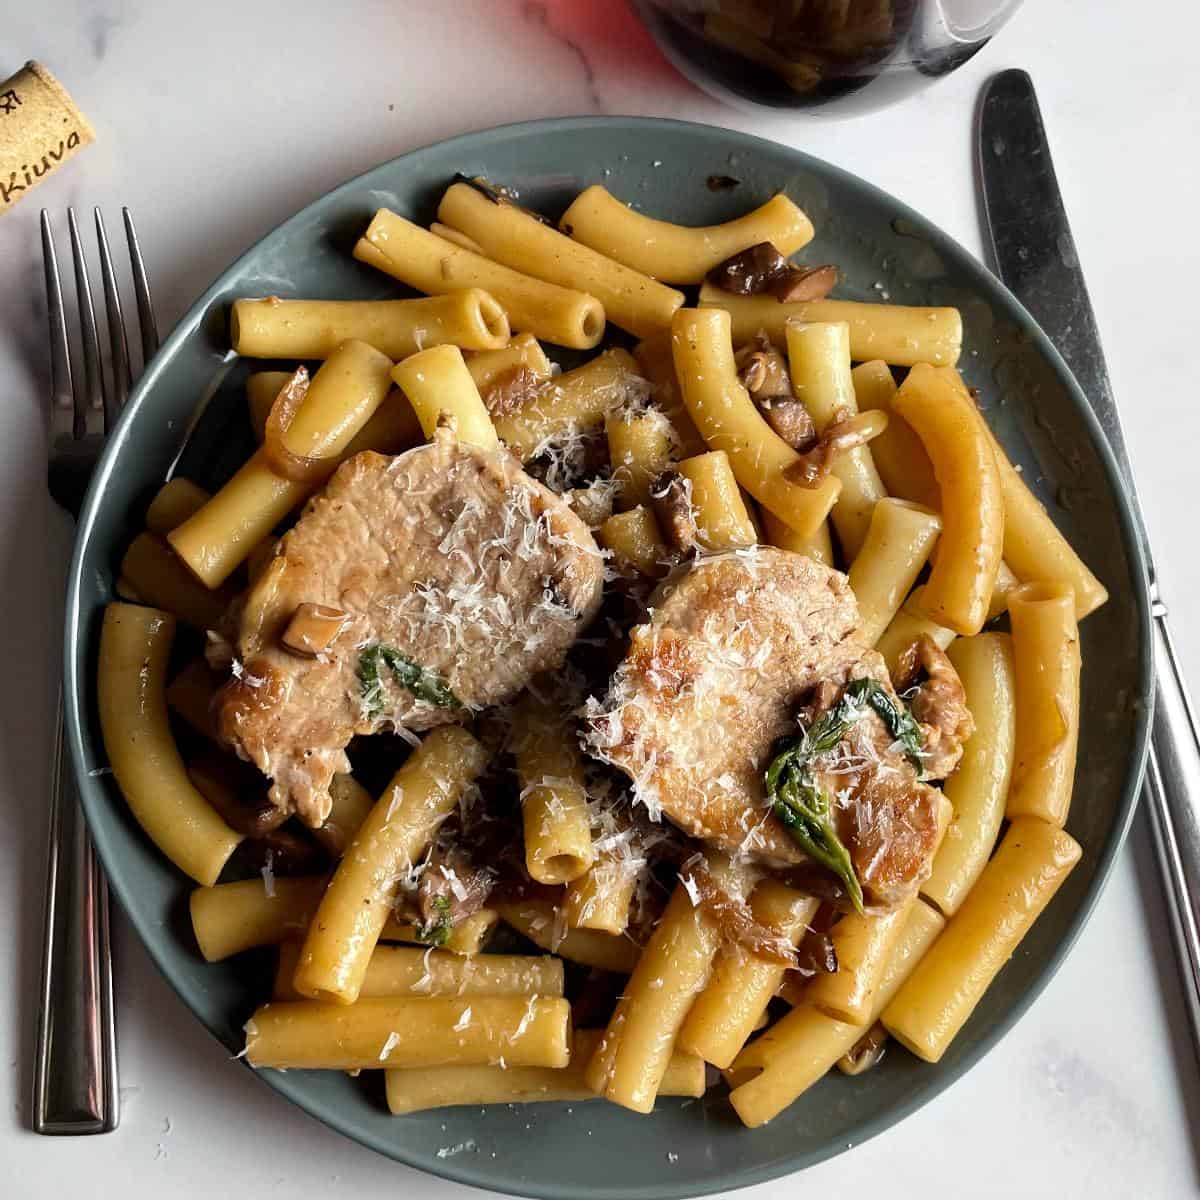 Pork Tenderloin Pasta Recipe with a New Italian Wine - Cooking Chat